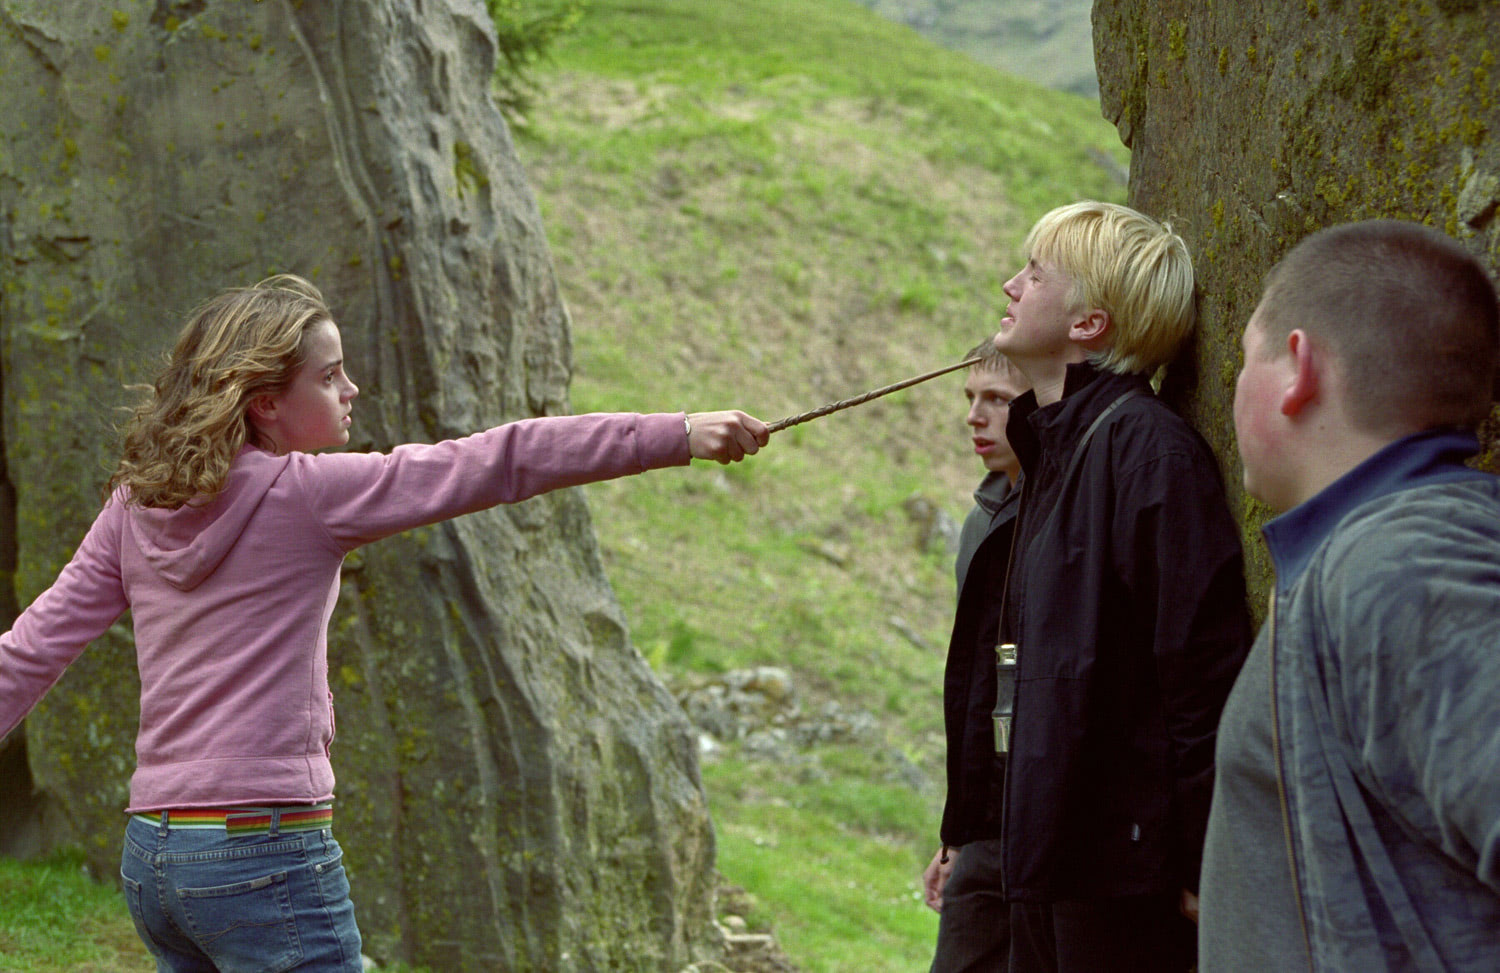 Hermione Granger pointing her wand towards Draco Malfoy in Harry Potter and the Prisoner of Azkaban (2004). 